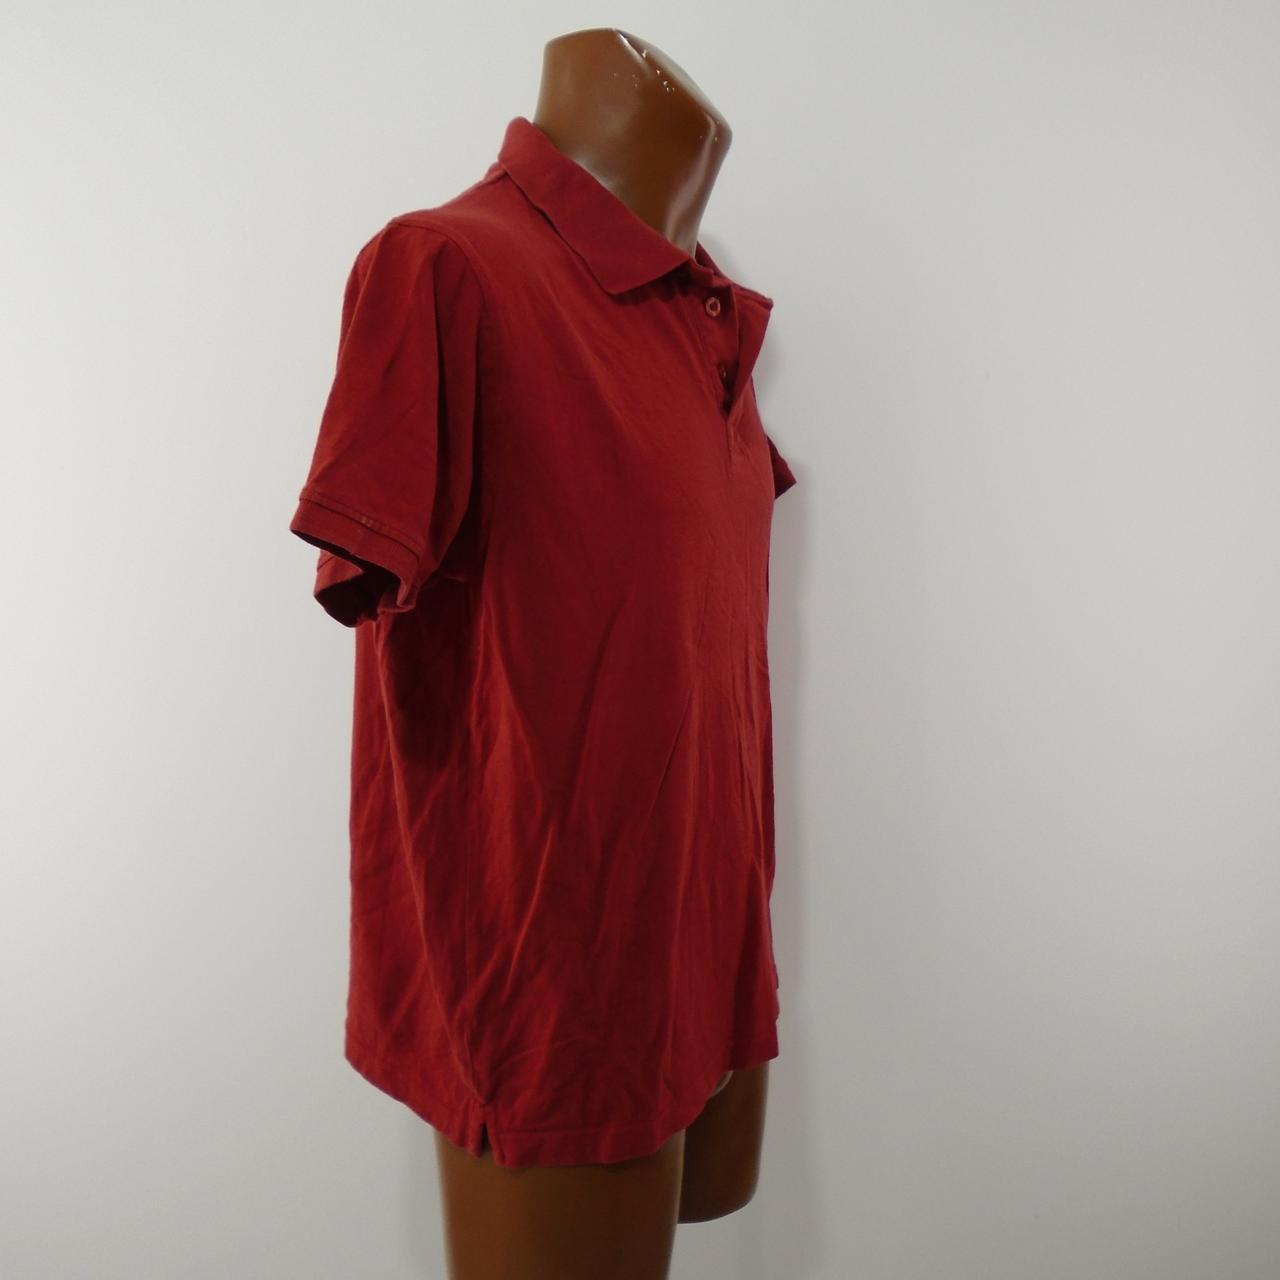 Men's Polo Pierre Cardin. Red. L. Used. Good